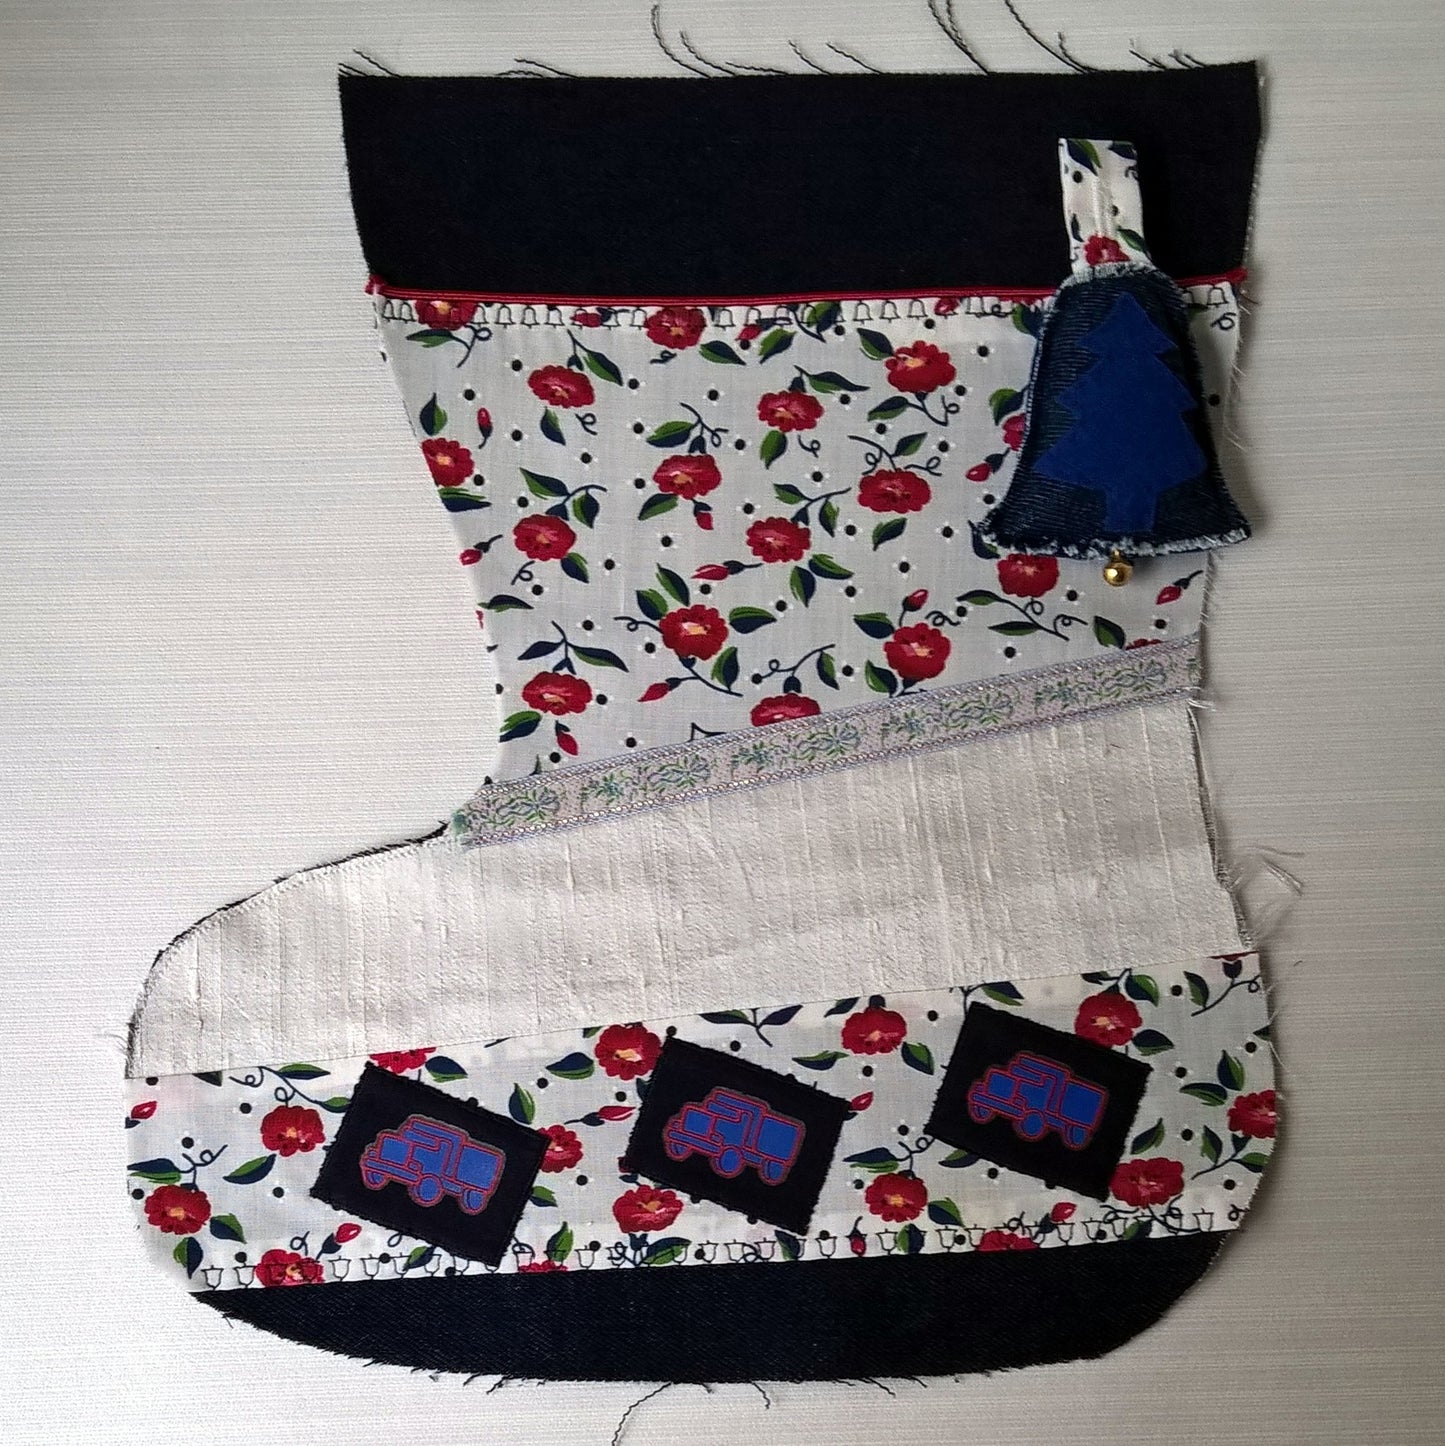 Indigo denim patchwork Christmas stocking  with truck motifs and a jungle bell ready to be hand embroidered